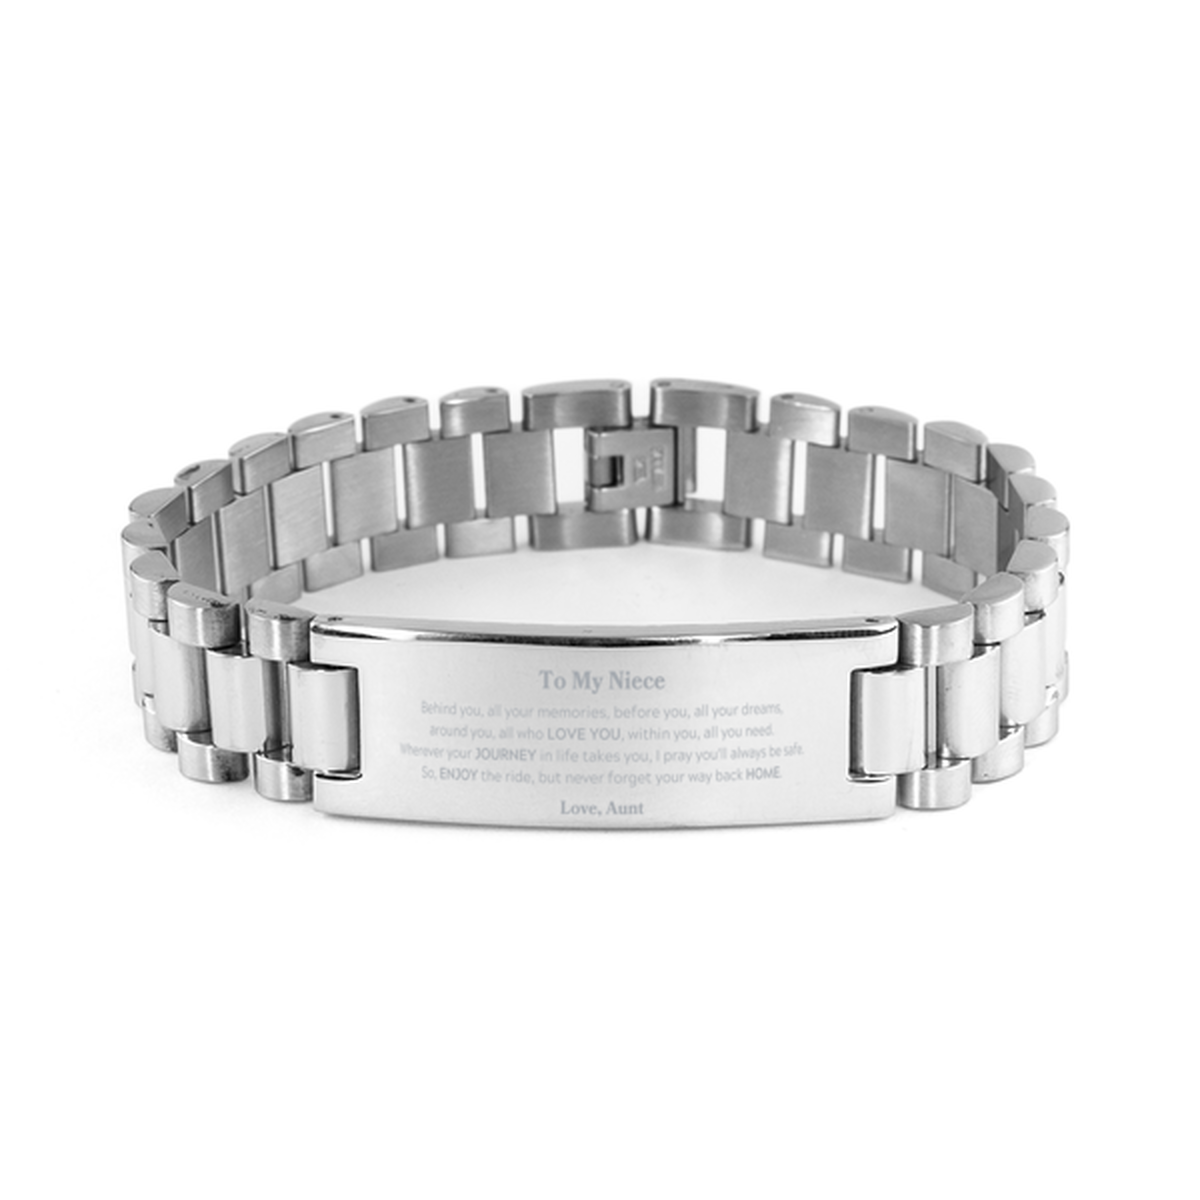 To My Niece Graduation Gifts from Aunt, Niece Ladder Stainless Steel Bracelet Christmas Birthday Gifts for Niece Behind you, all your memories, before you, all your dreams. Love, Aunt